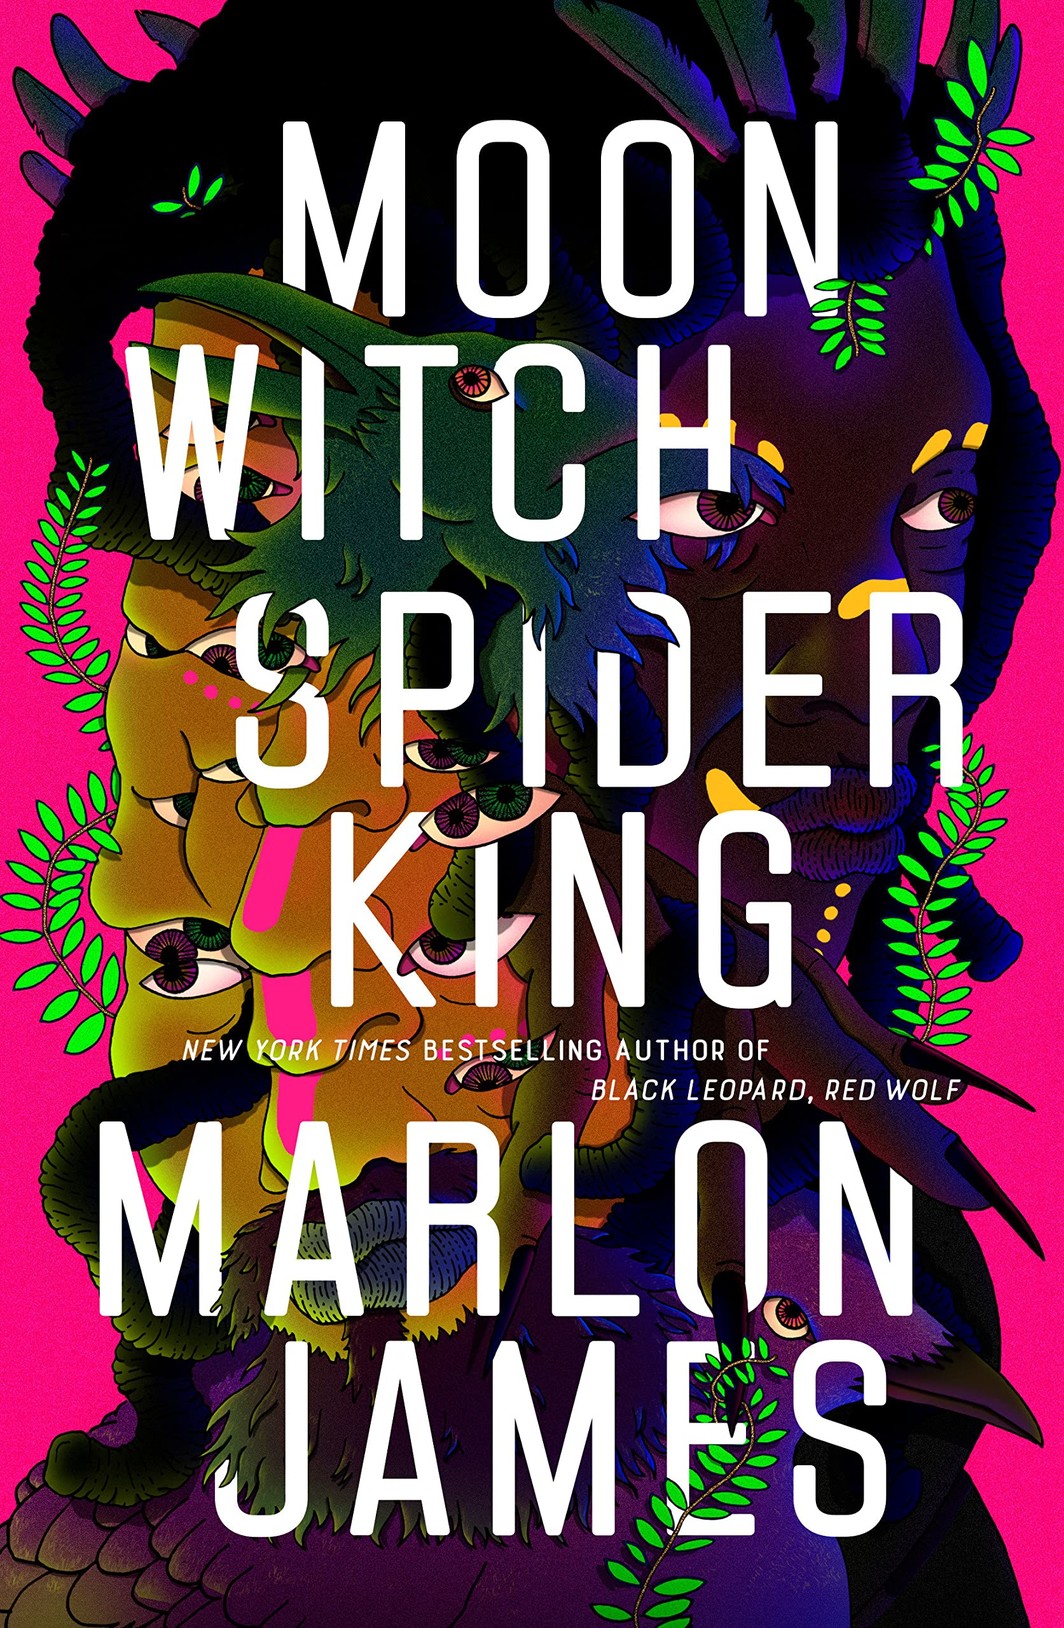 The cover of Moon Witch, Spider King